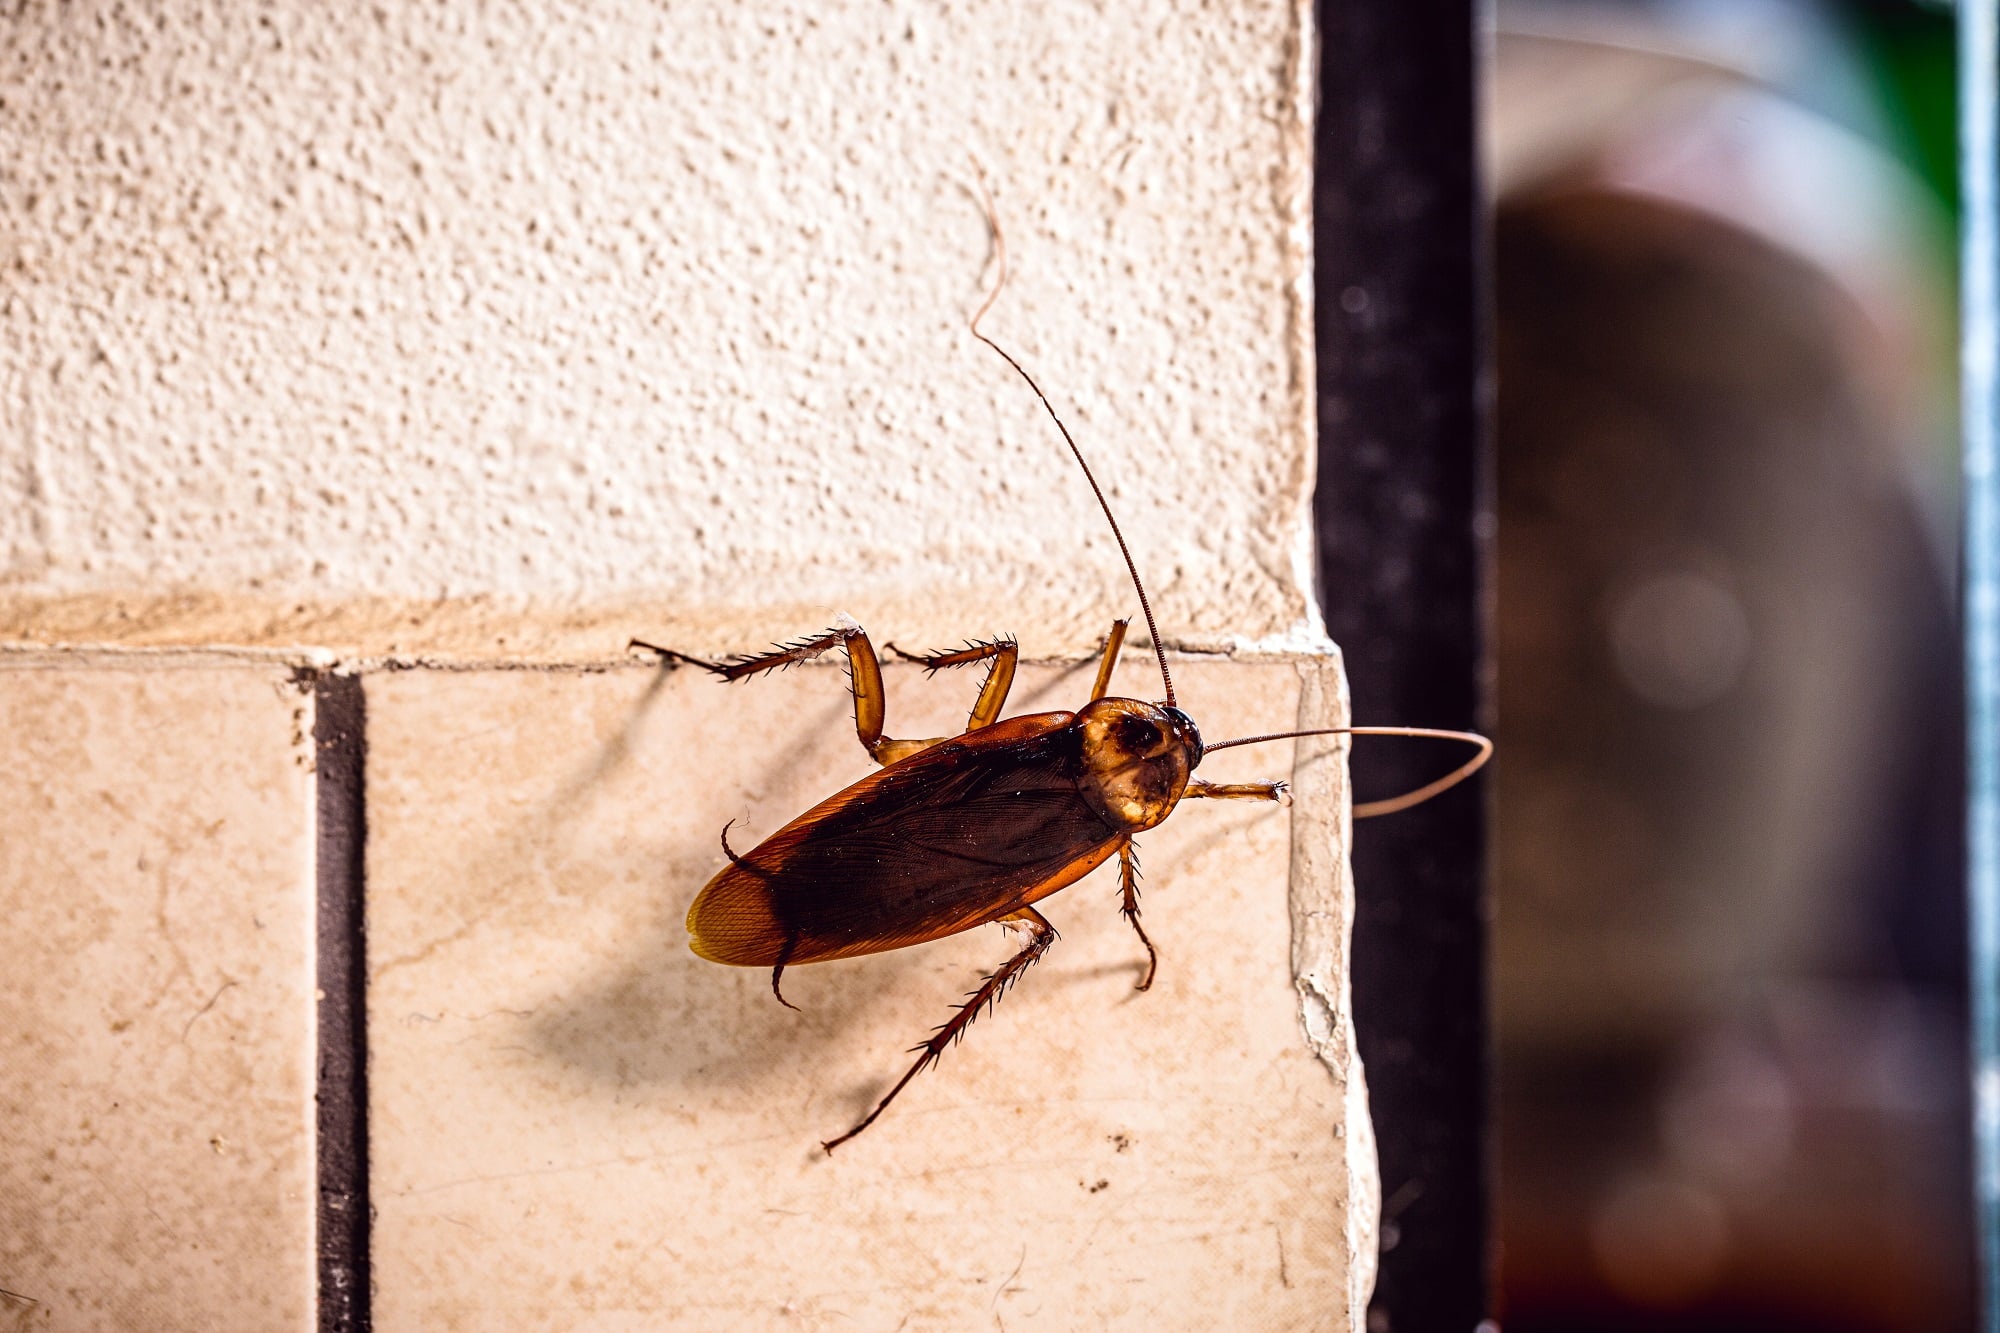 chilean cockroaches unwanted guests in american homes